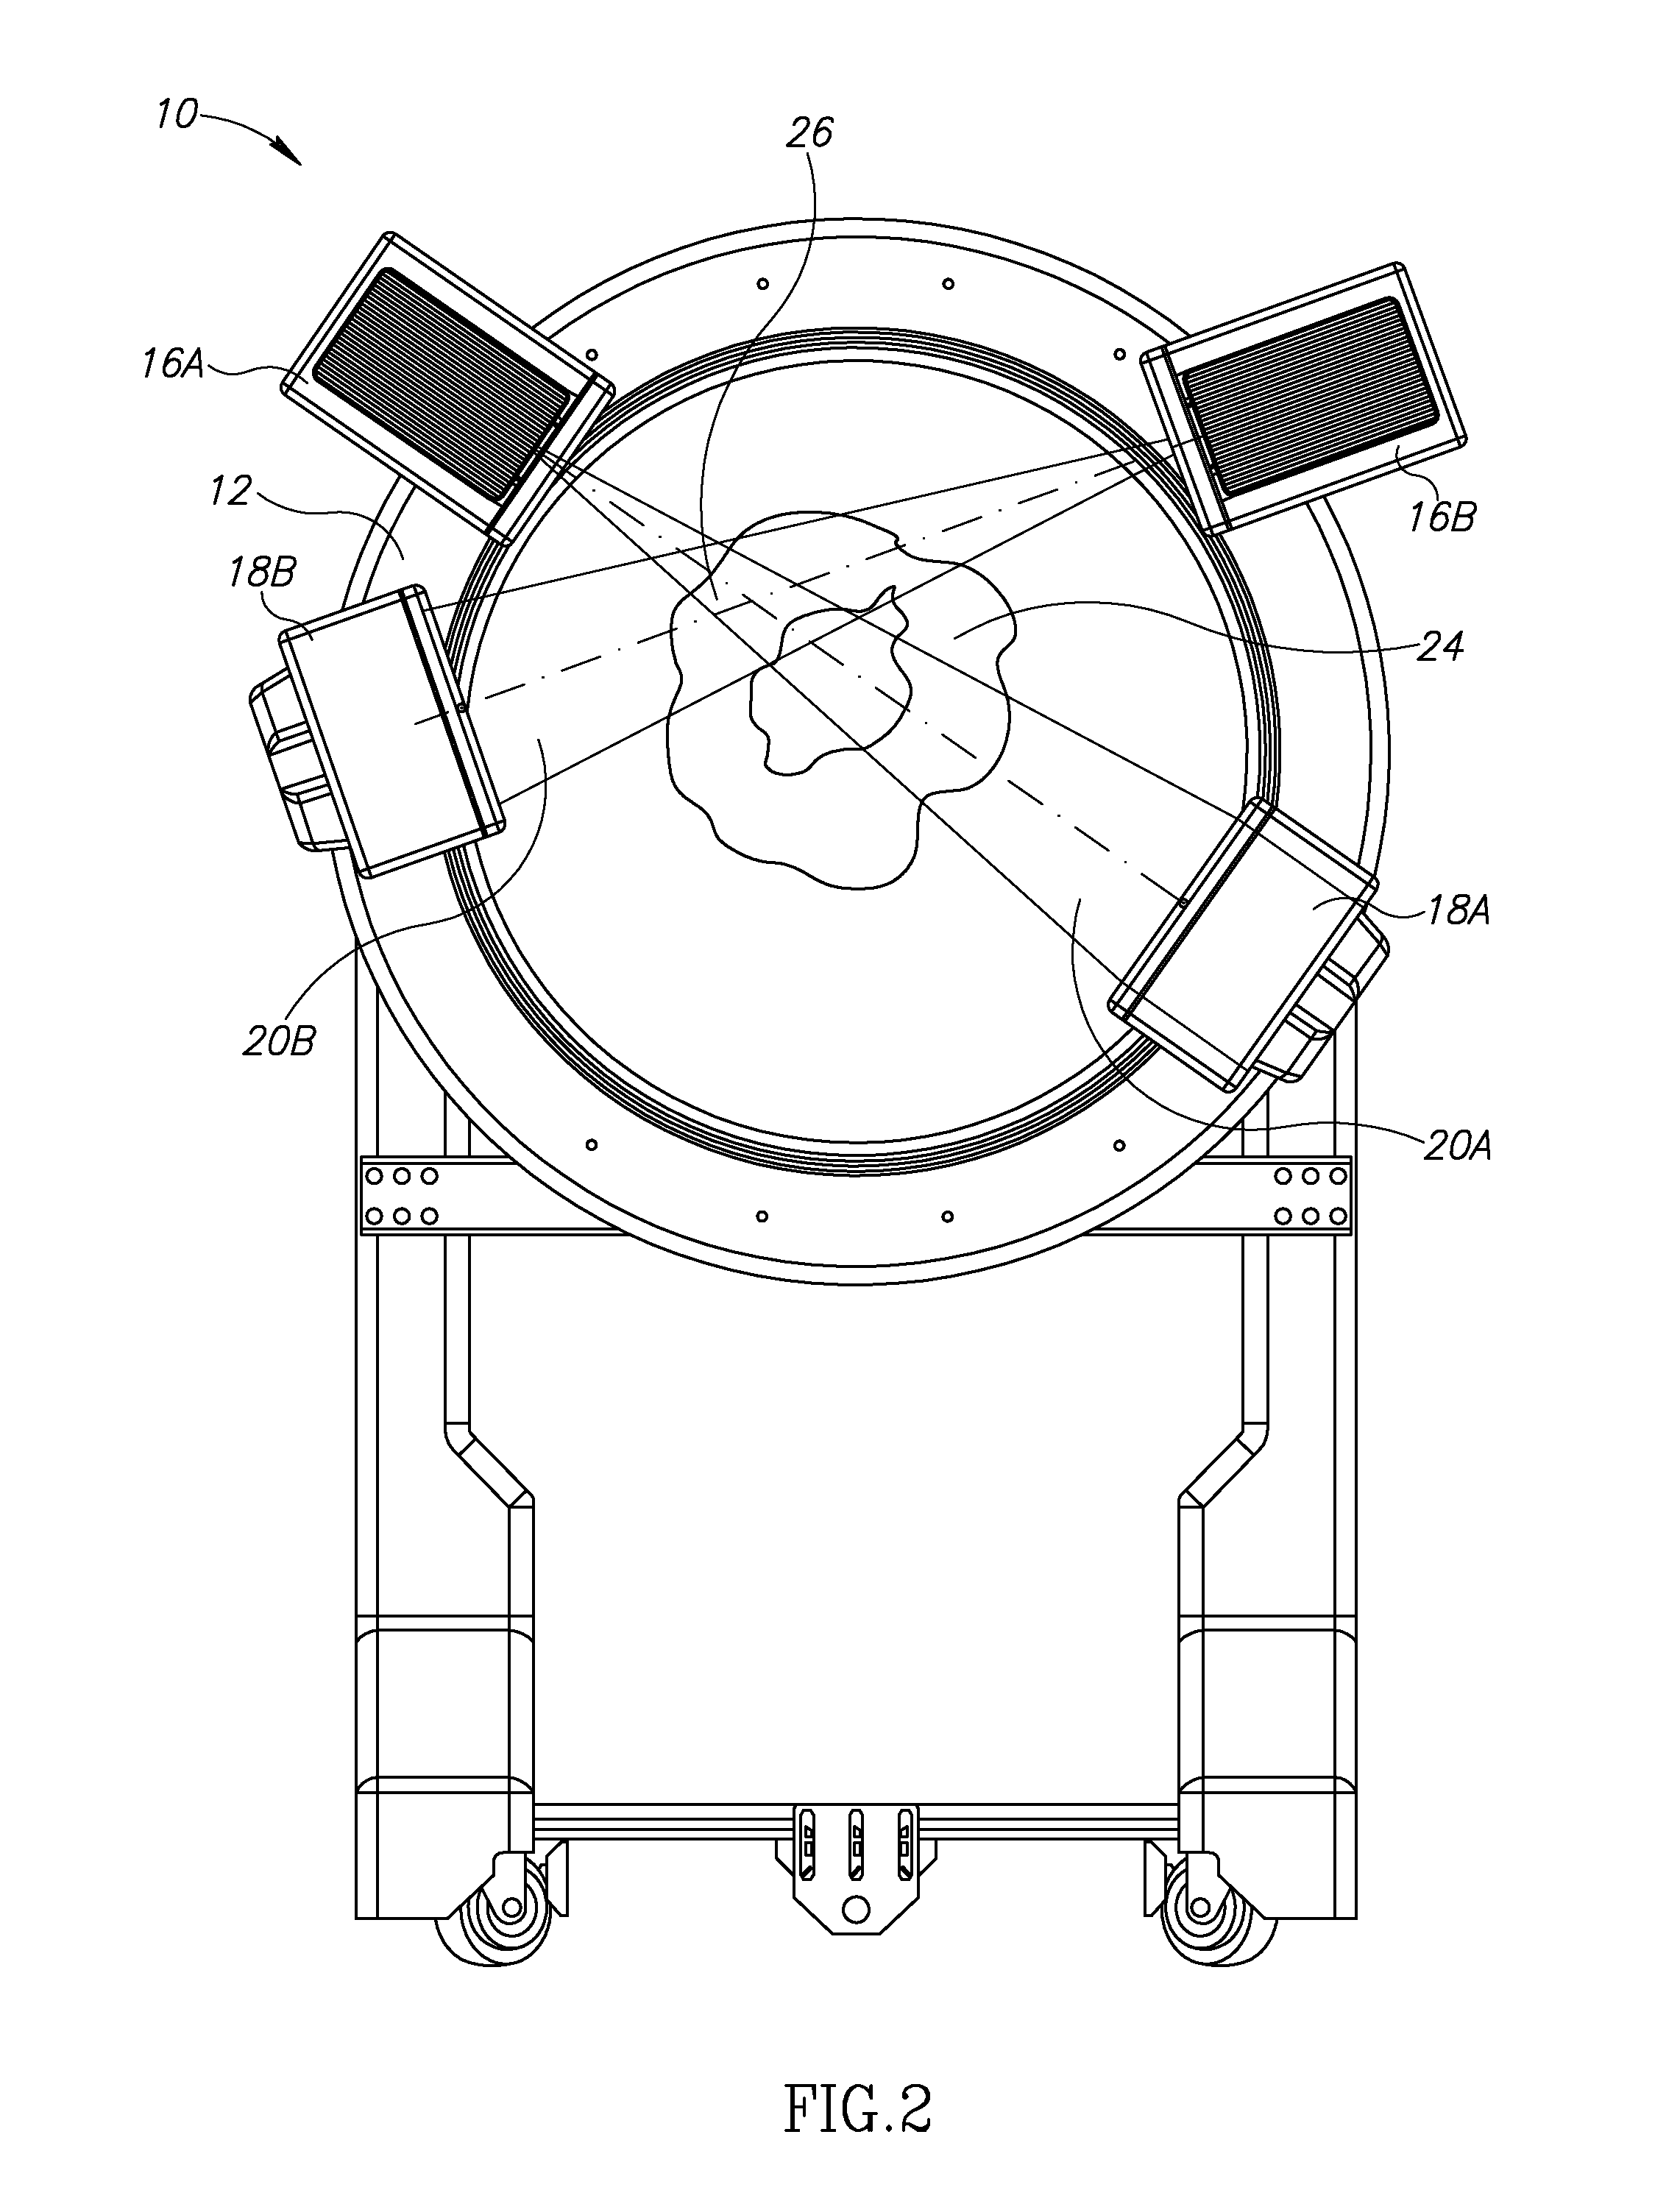 Ct scanning system with interlapping beams